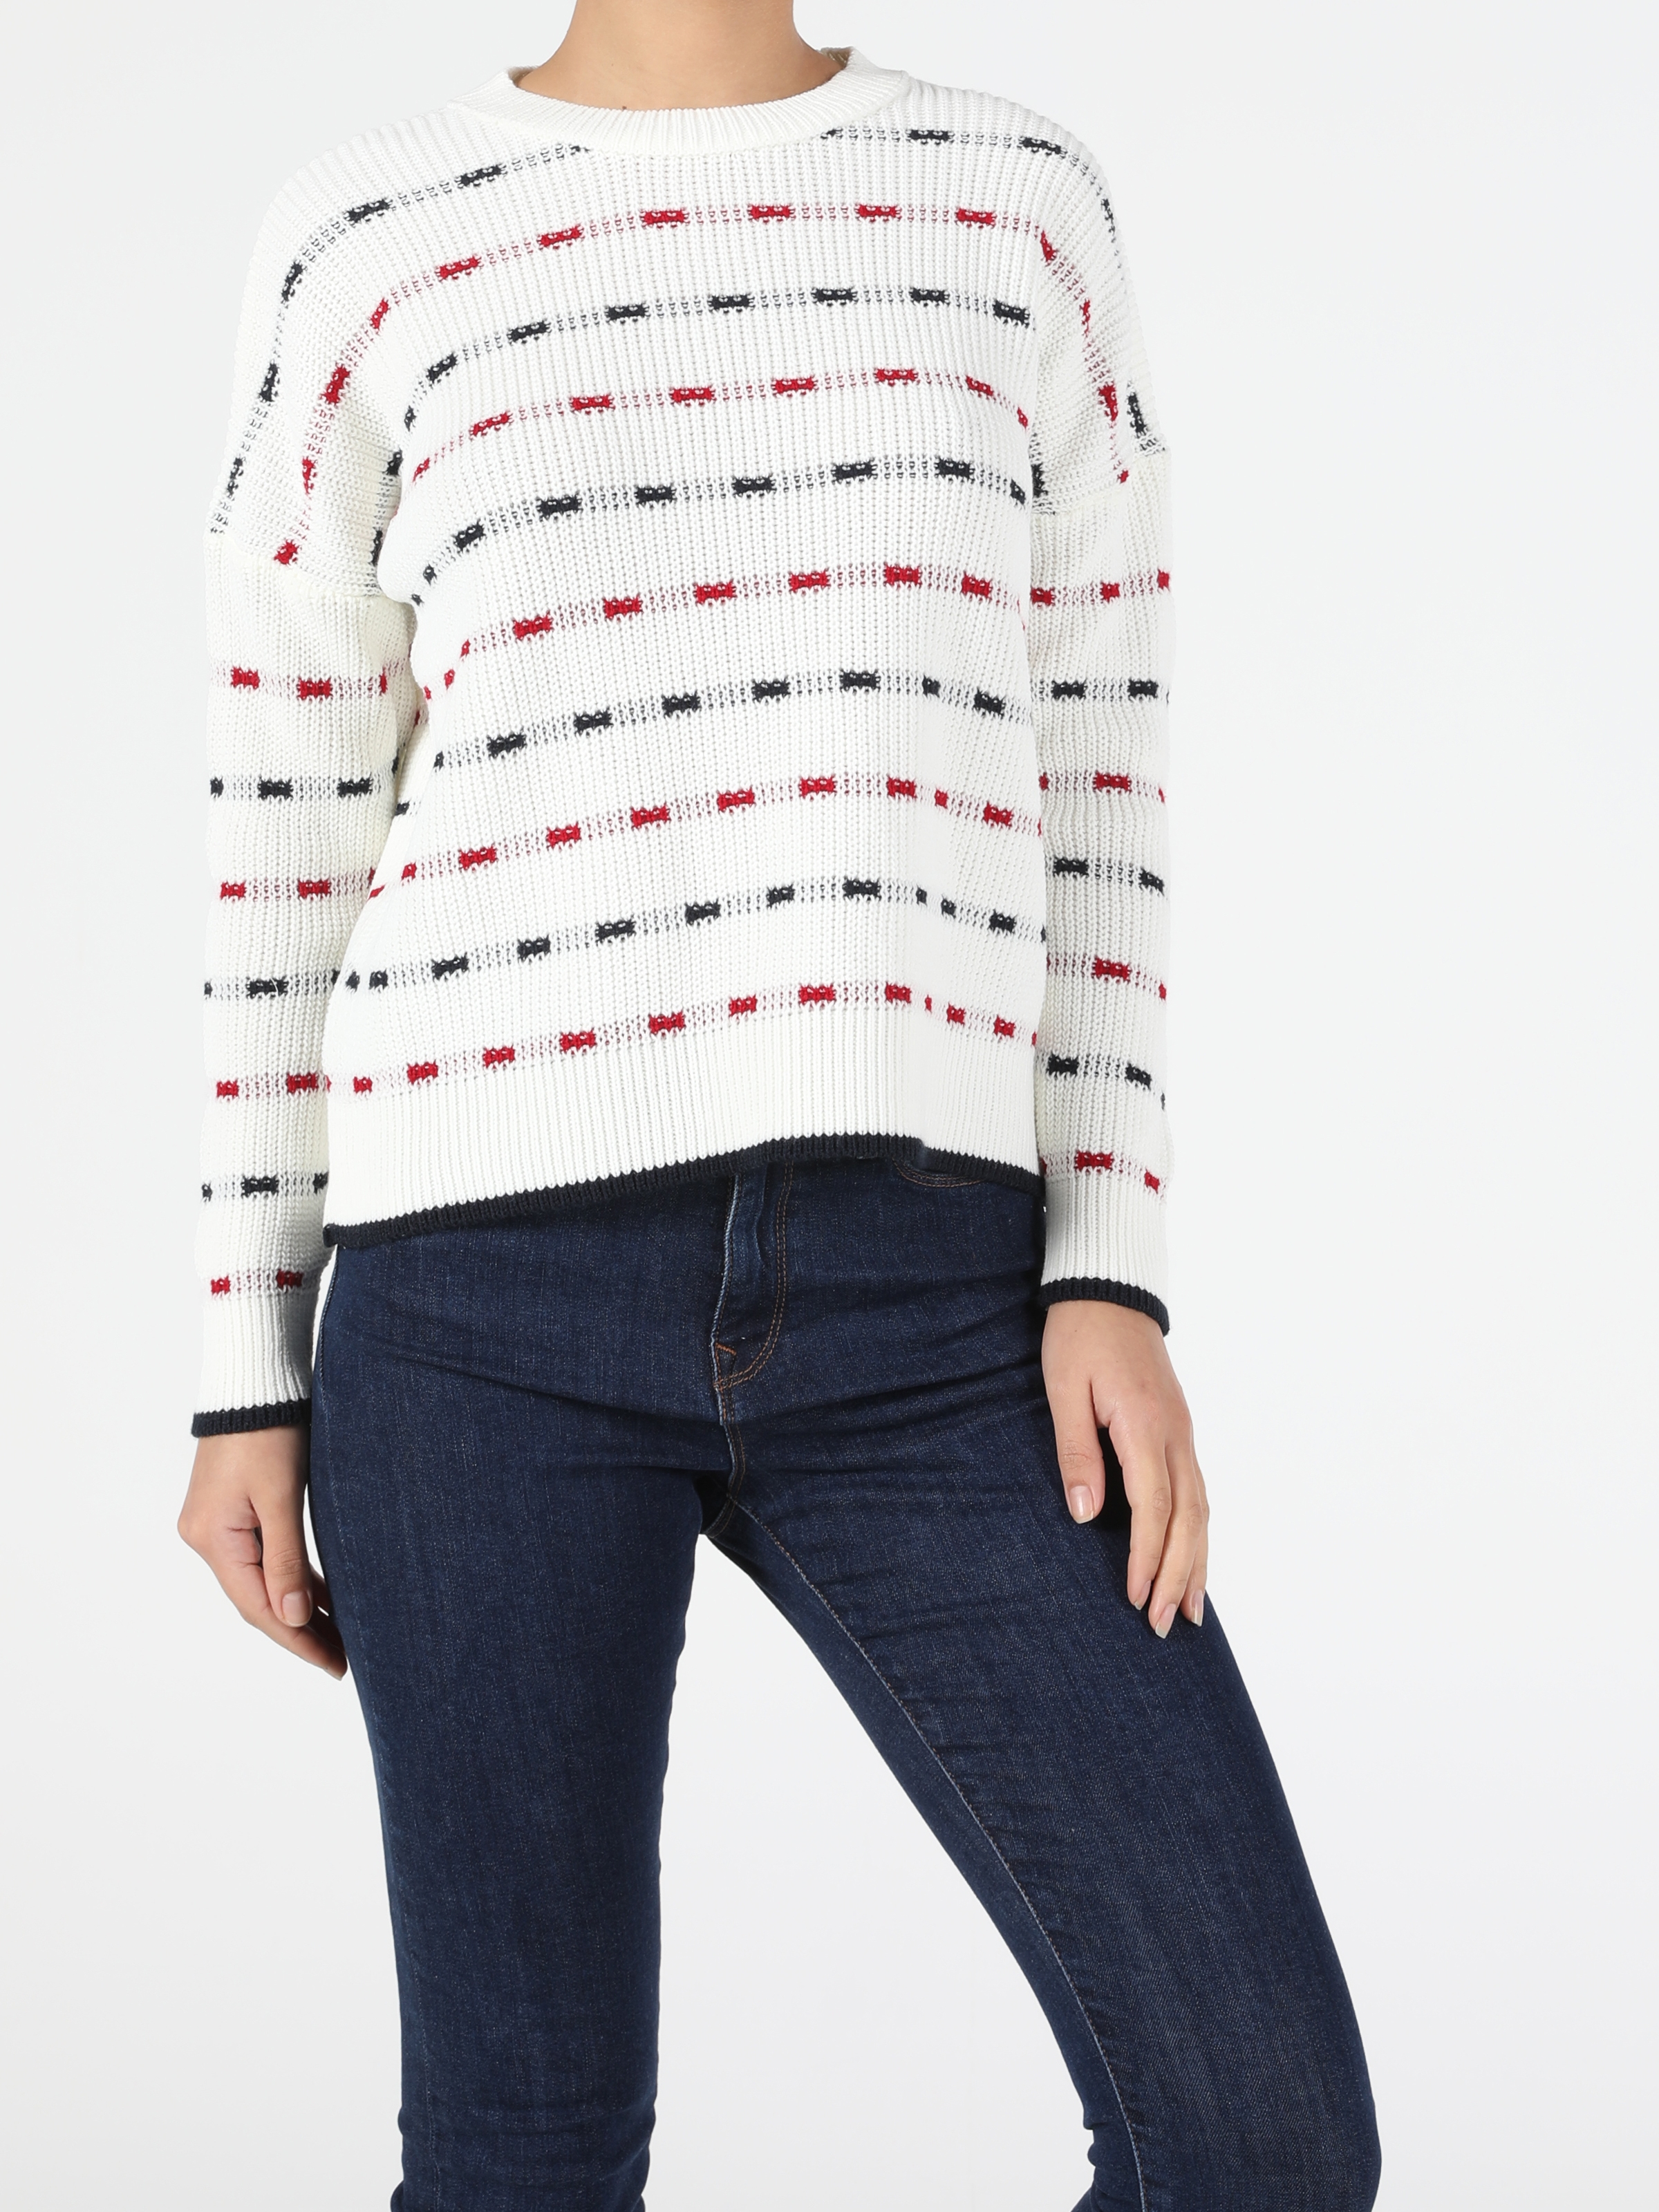 Colins Whıte Woman Sweaters. 3